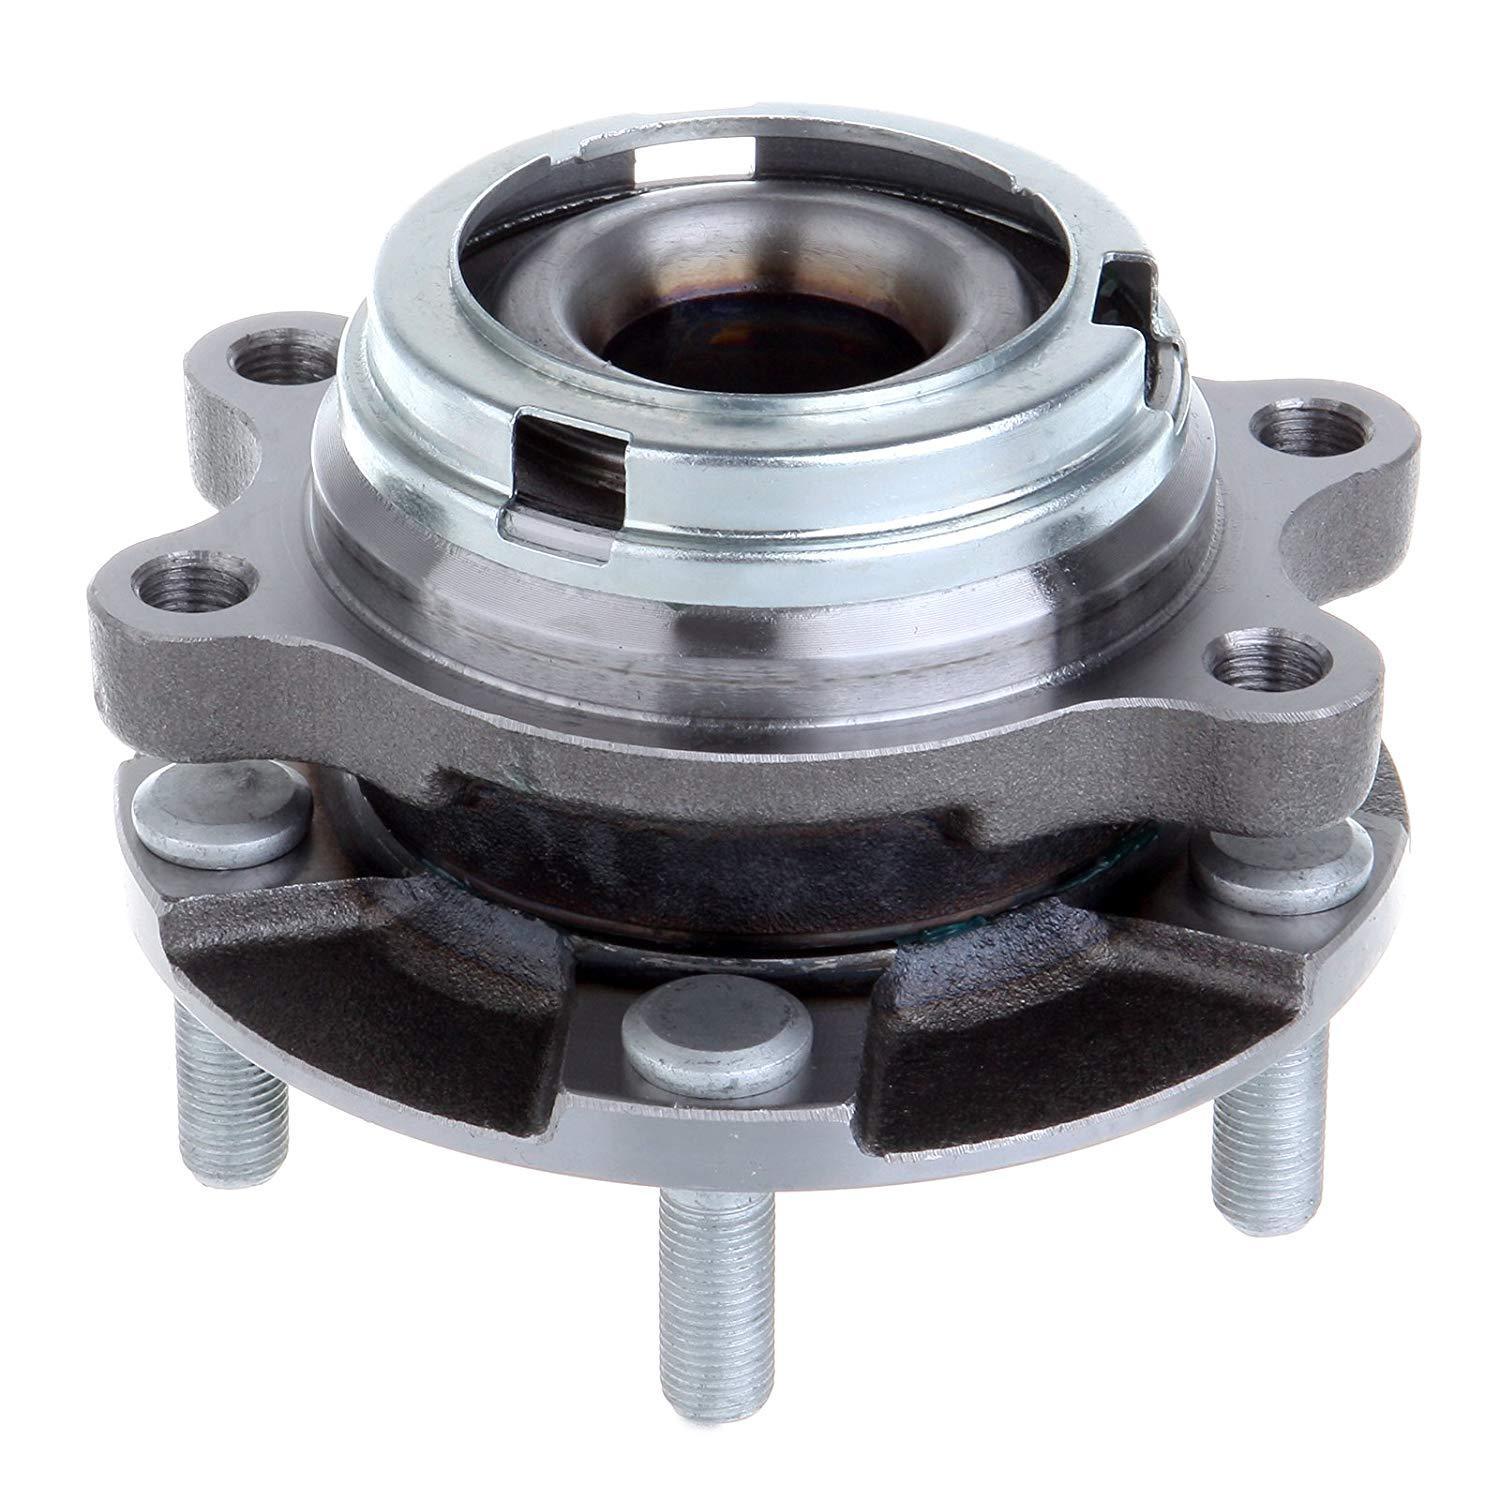 MotorbyMotor HA590125 Front Wheel Bearing and Hub Assembly w/5 Lugs for Infiniti EX35 EX37 FX35 FX37 FX45 FX50 G25 G35 G37 M35 M37 M45 M56 Q40 Q50 Q60 Q70 QX50 QX70 Hub Bearing (AWD) MotorbyMotor